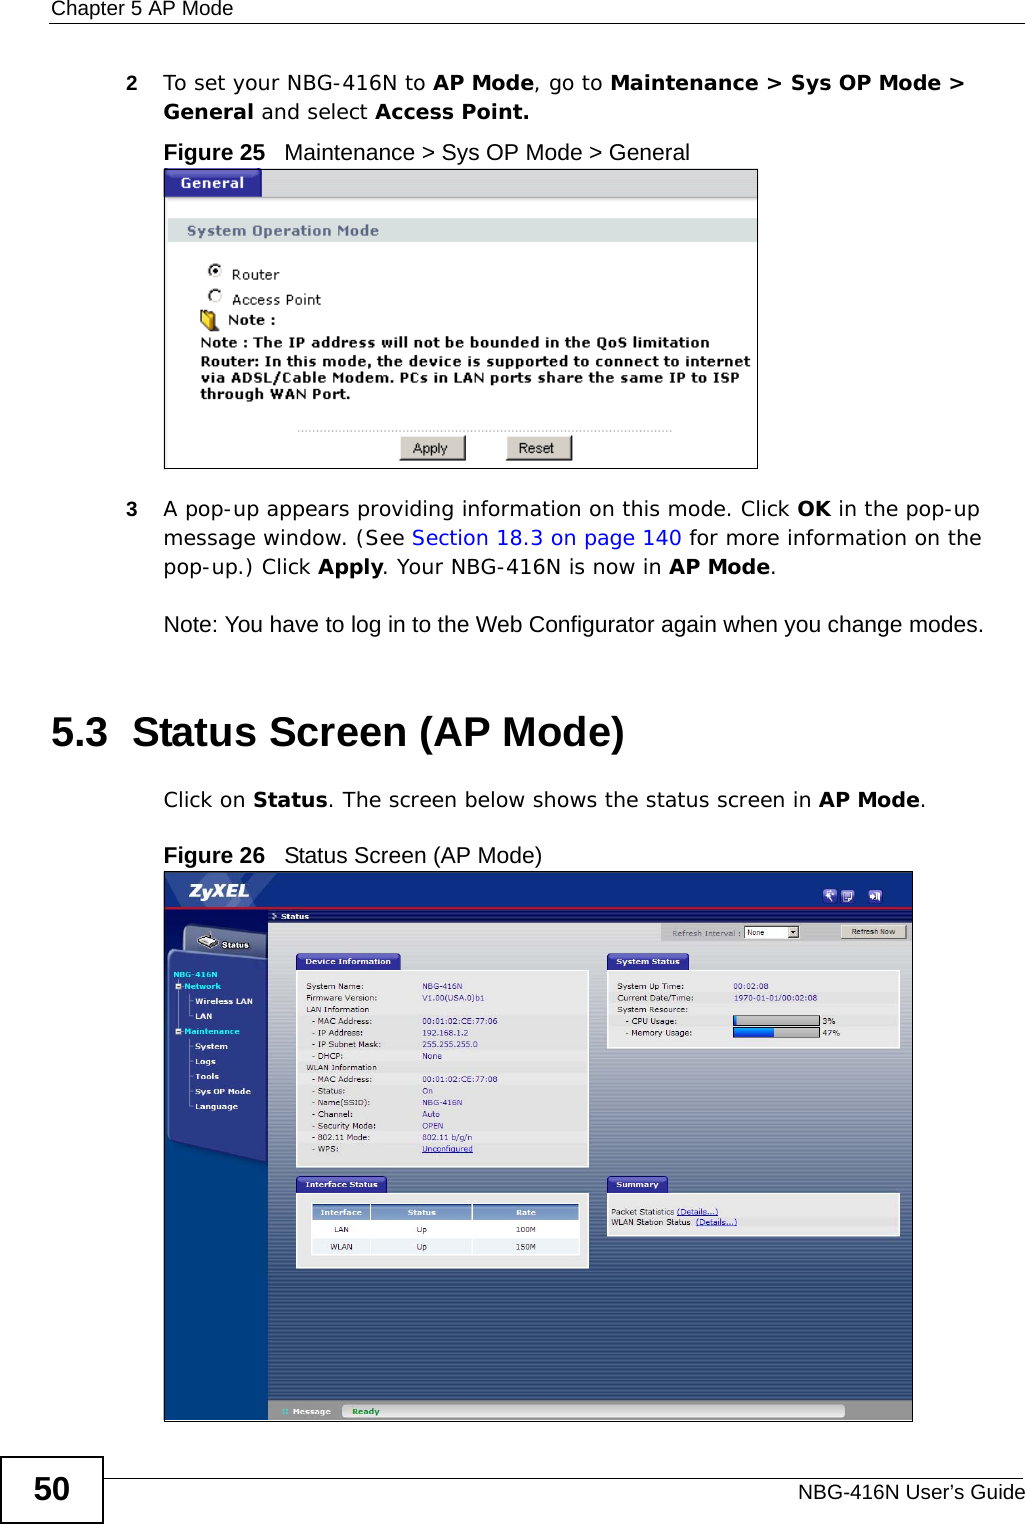 Chapter 5 AP ModeNBG-416N User’s Guide502To set your NBG-416N to AP Mode, go to Maintenance &gt; Sys OP Mode &gt; General and select Access Point.Figure 25   Maintenance &gt; Sys OP Mode &gt; General3A pop-up appears providing information on this mode. Click OK in the pop-up message window. (See Section 18.3 on page 140 for more information on the pop-up.) Click Apply. Your NBG-416N is now in AP Mode.Note: You have to log in to the Web Configurator again when you change modes.5.3  Status Screen (AP Mode)Click on Status. The screen below shows the status screen in AP Mode. Figure 26   Status Screen (AP Mode) 